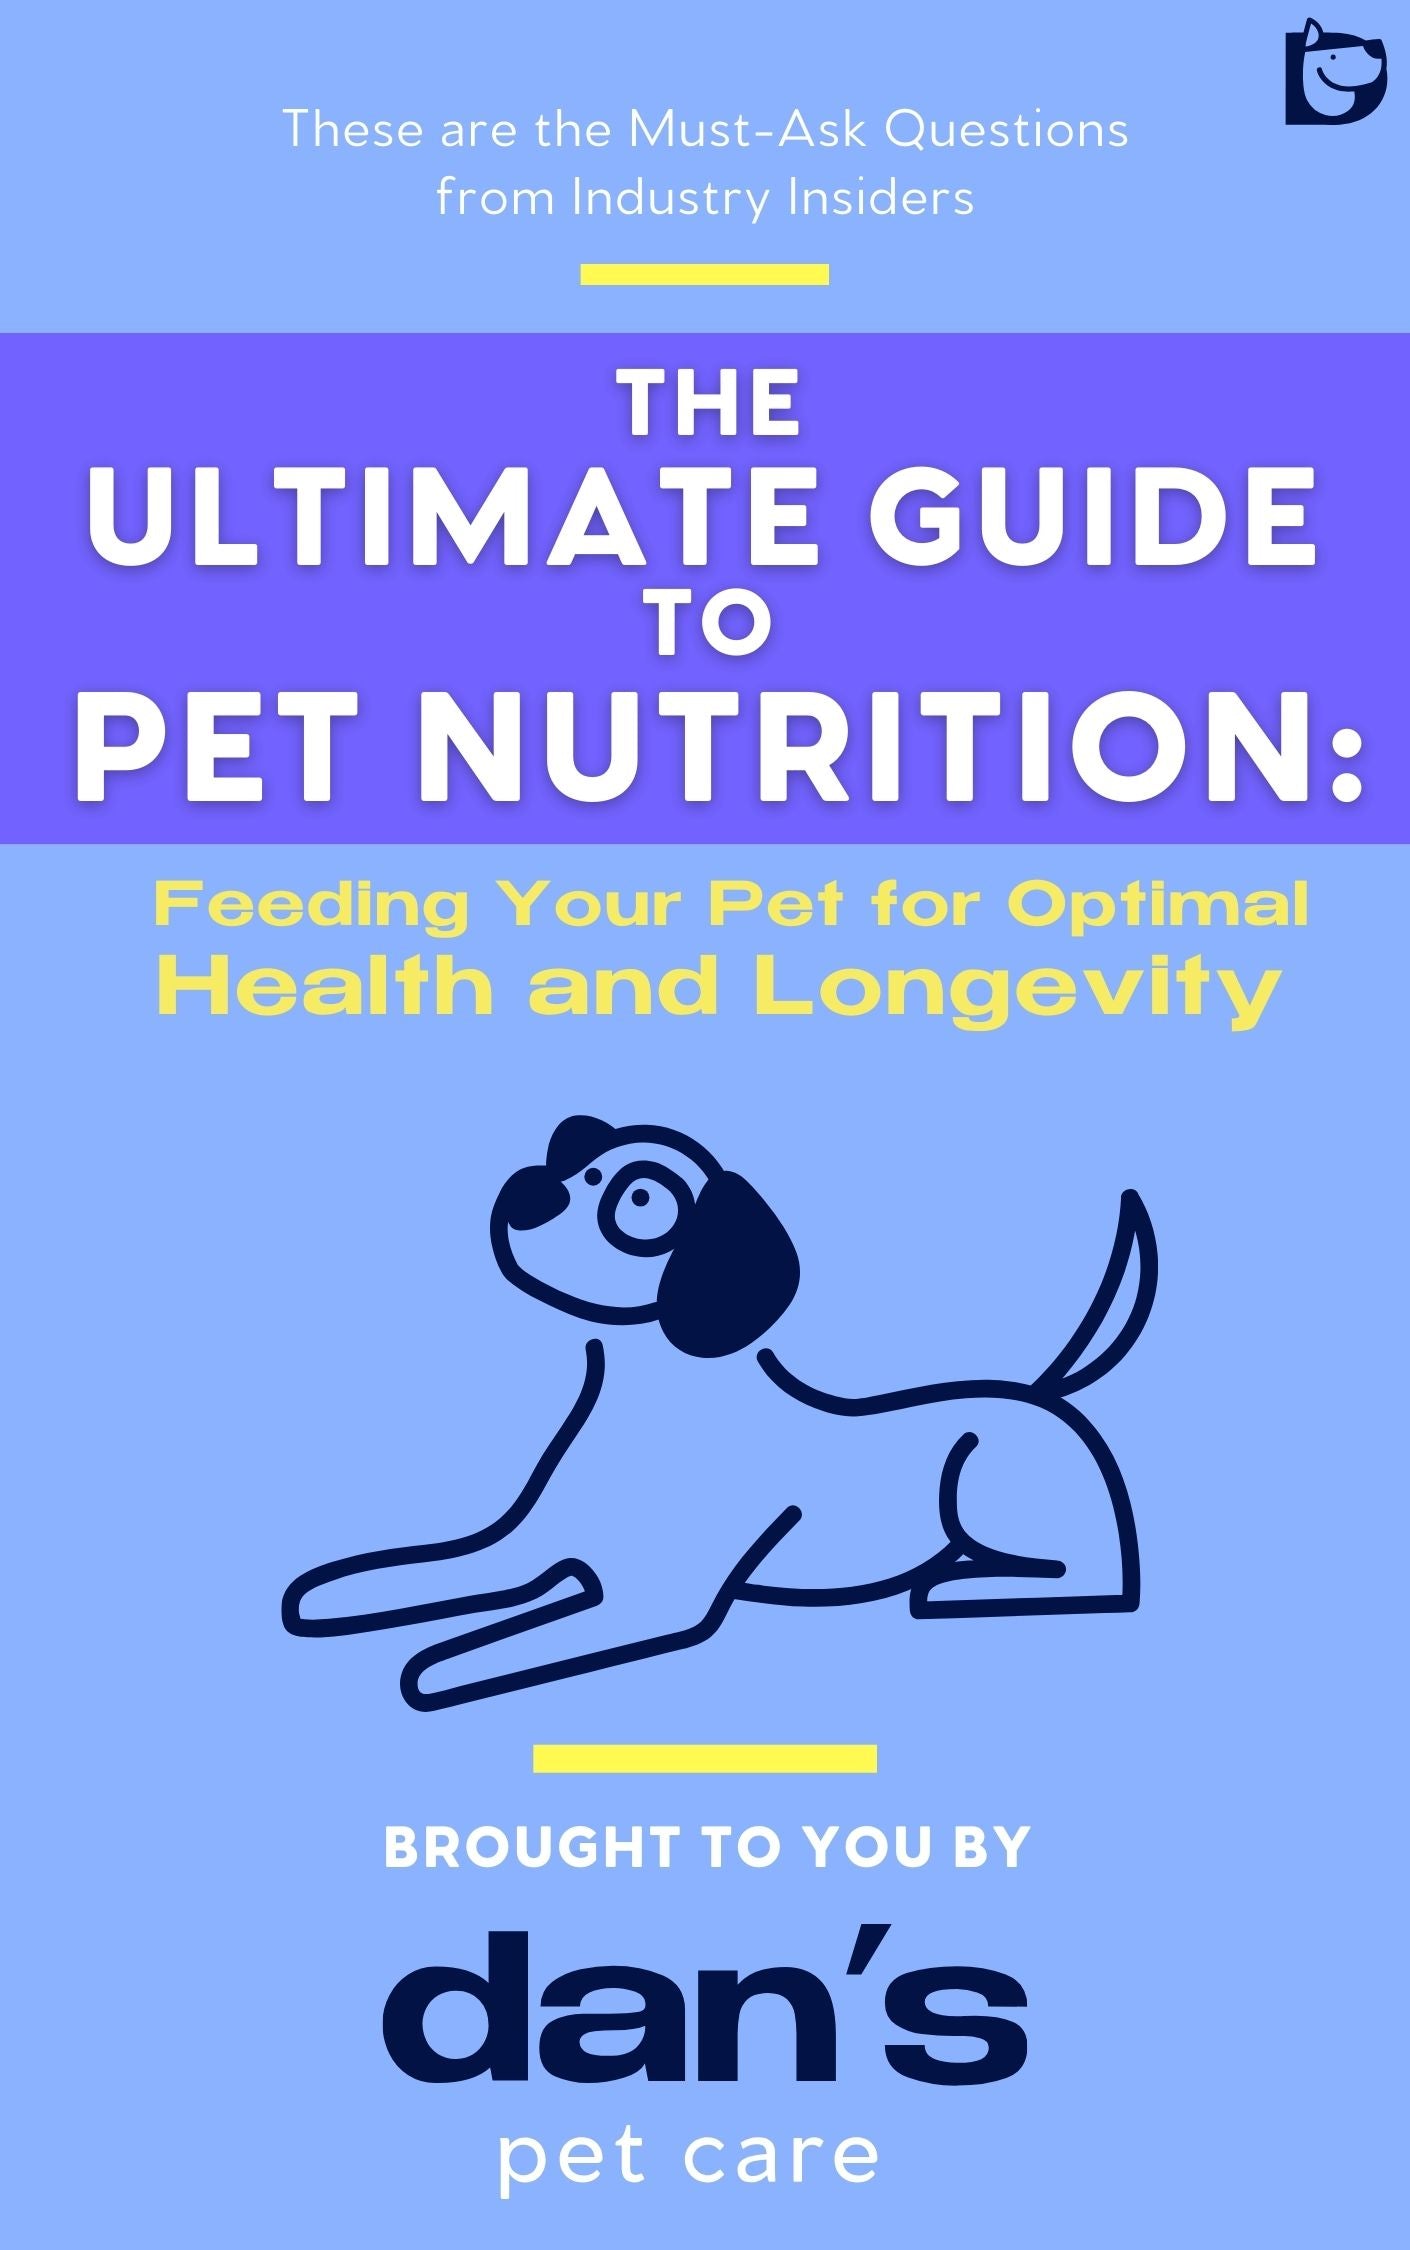 The Ultimate Guide to Pet Nutrition